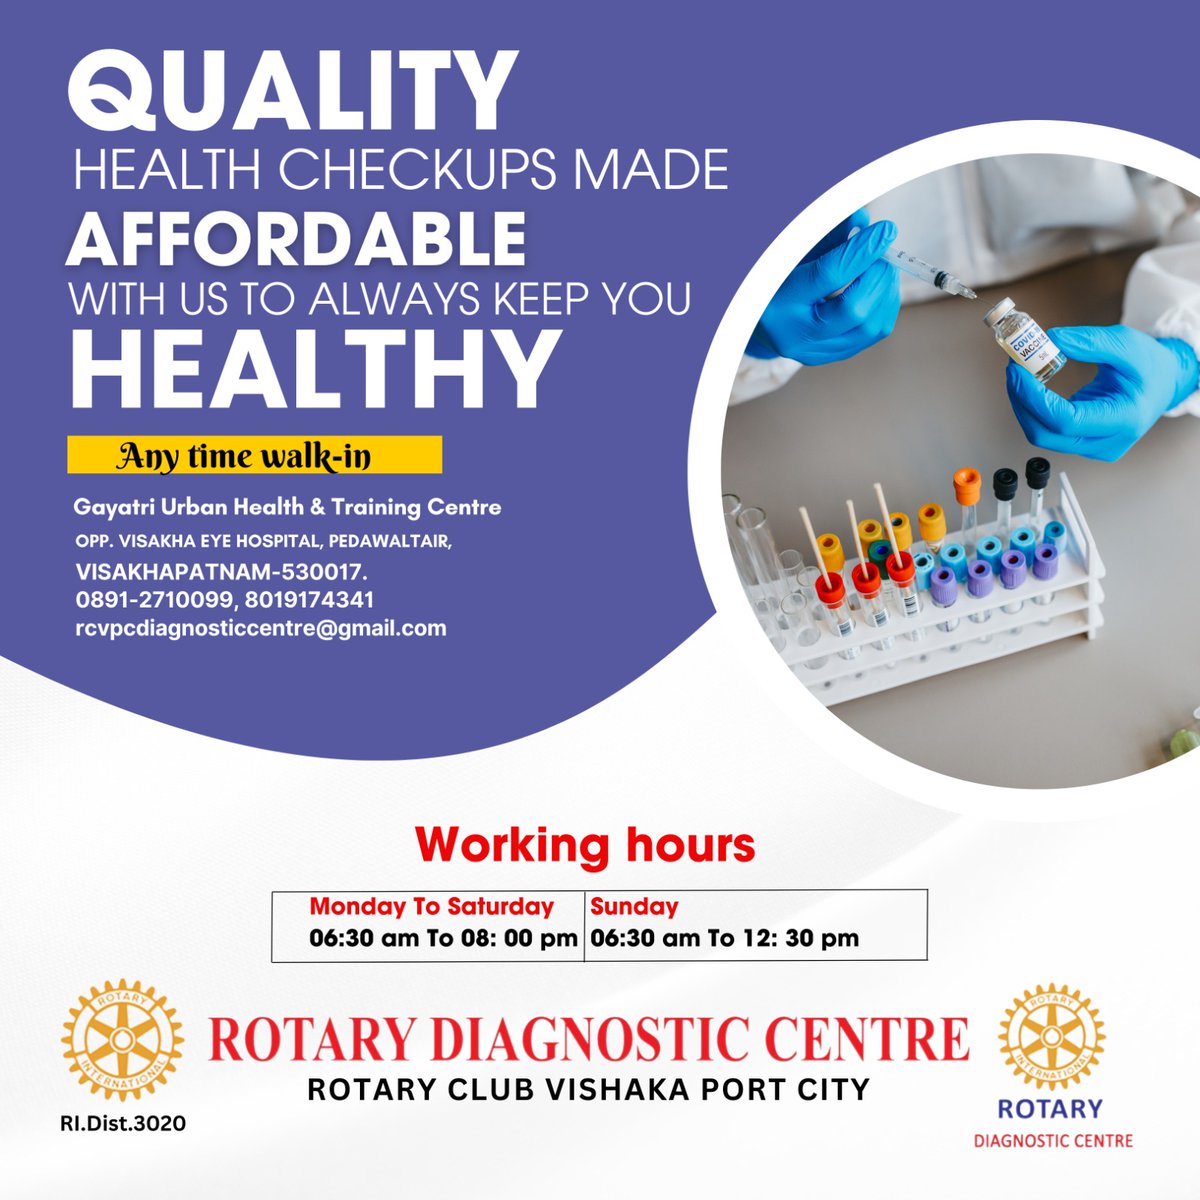 At Rotary Diagnostic Centre, we make staying healthy easy and affordable with our comprehensive, cost-effective health checkups.
#RotaryDiagnosticCentre #DiagnosticCenter #HealthScreening #MedicalDiagnostics #EarlyDetection #StayHealthy #AdvancedDiagnostics #HealthcareServices